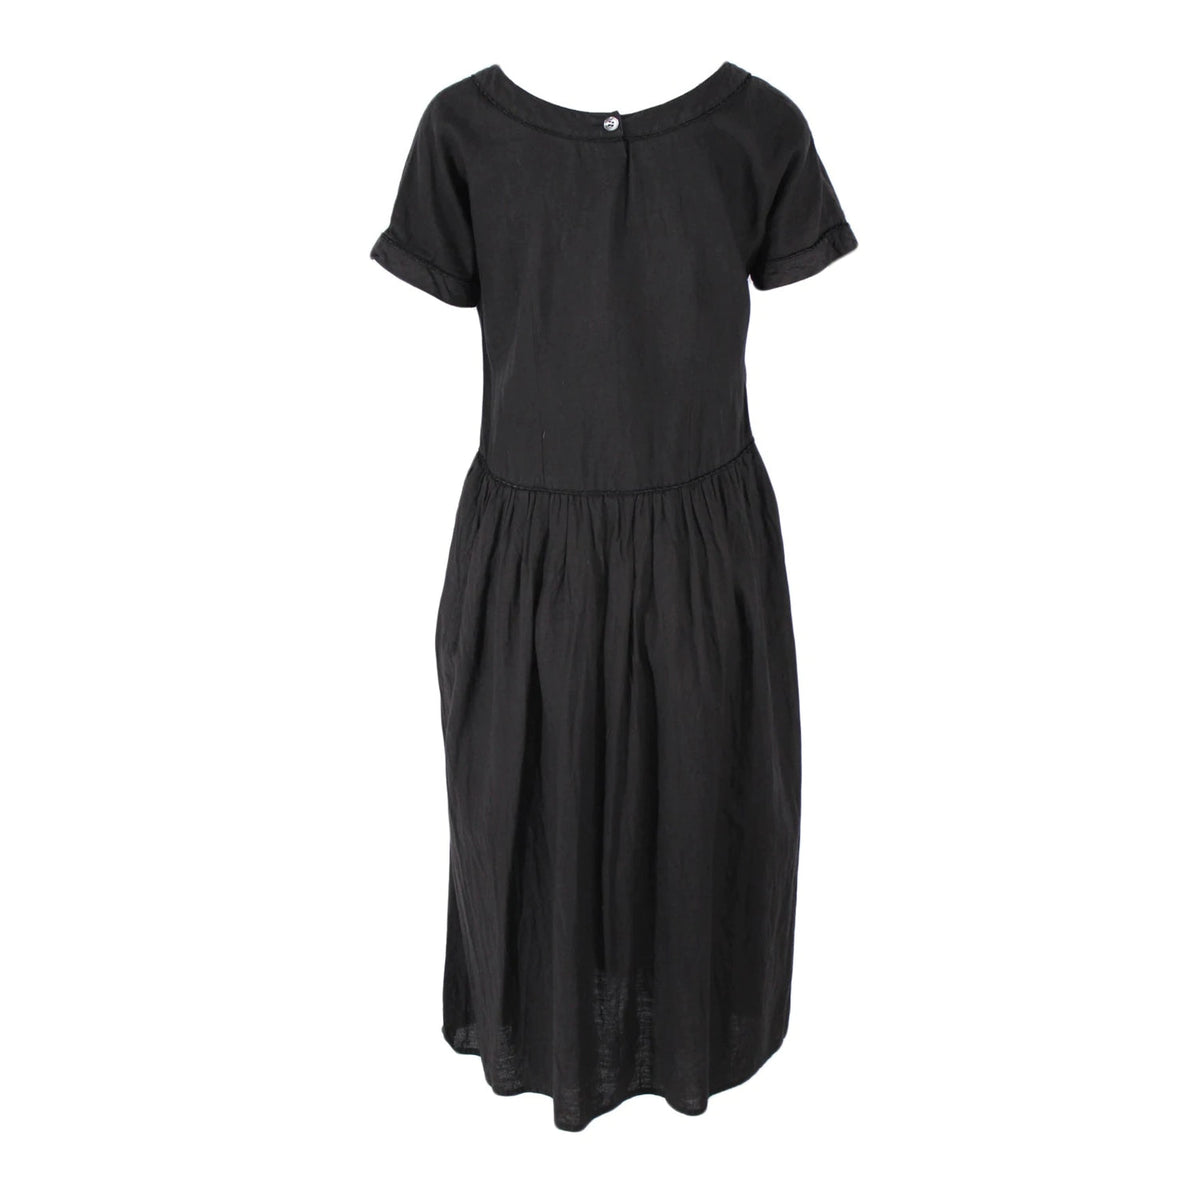 Pre-Owned SAKS FIFTH AVENUE Vintage Black Dress |  Size 6 - M/L - theREMODA